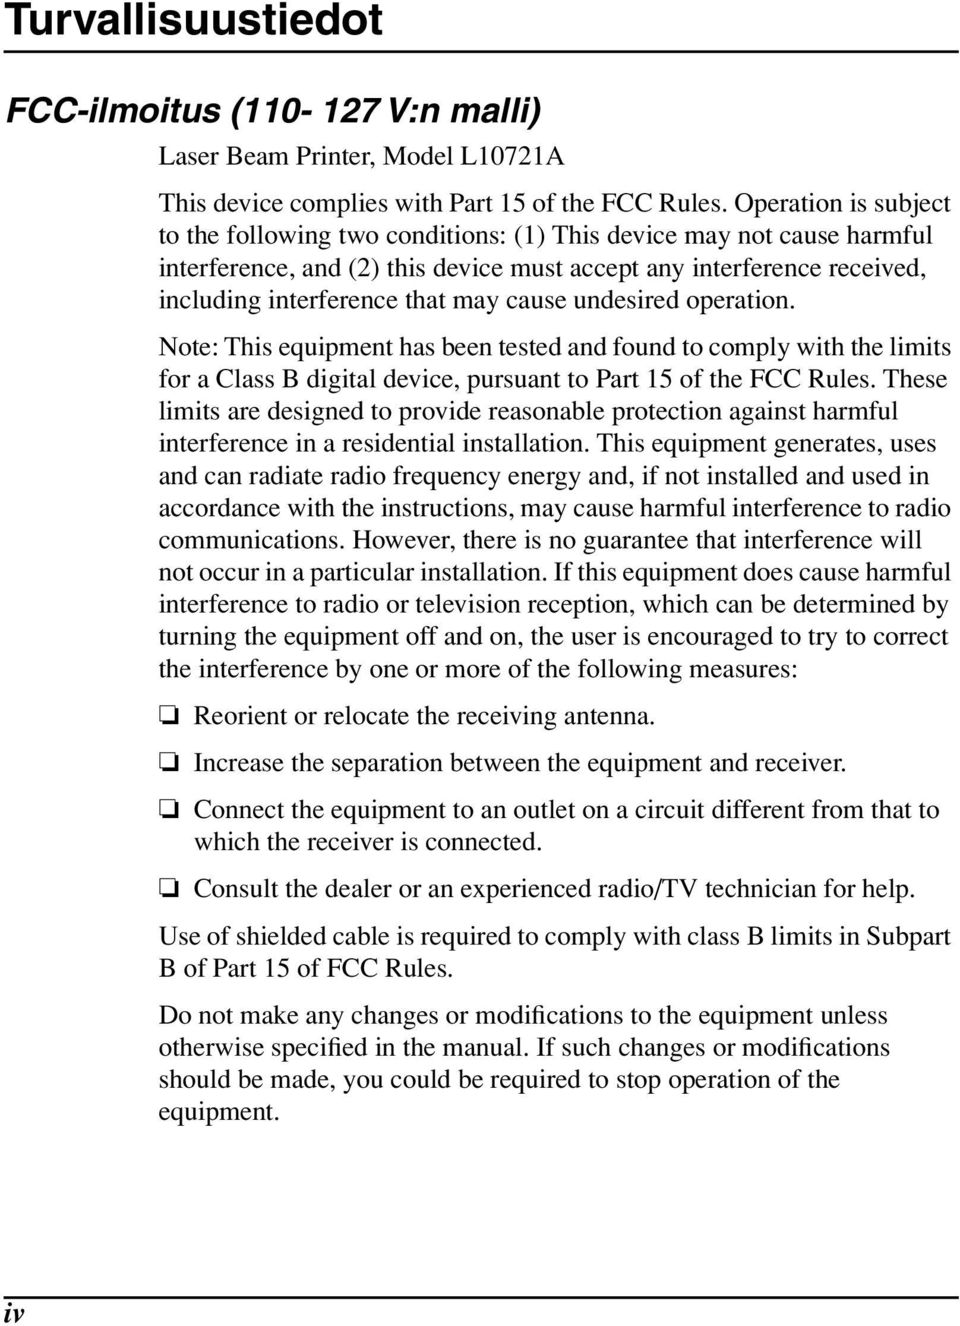 cause undesired operation. Note: This equipment has been tested and found to comply with the limits for a Class B digital device, pursuant to Part 15 of the FCC Rules.